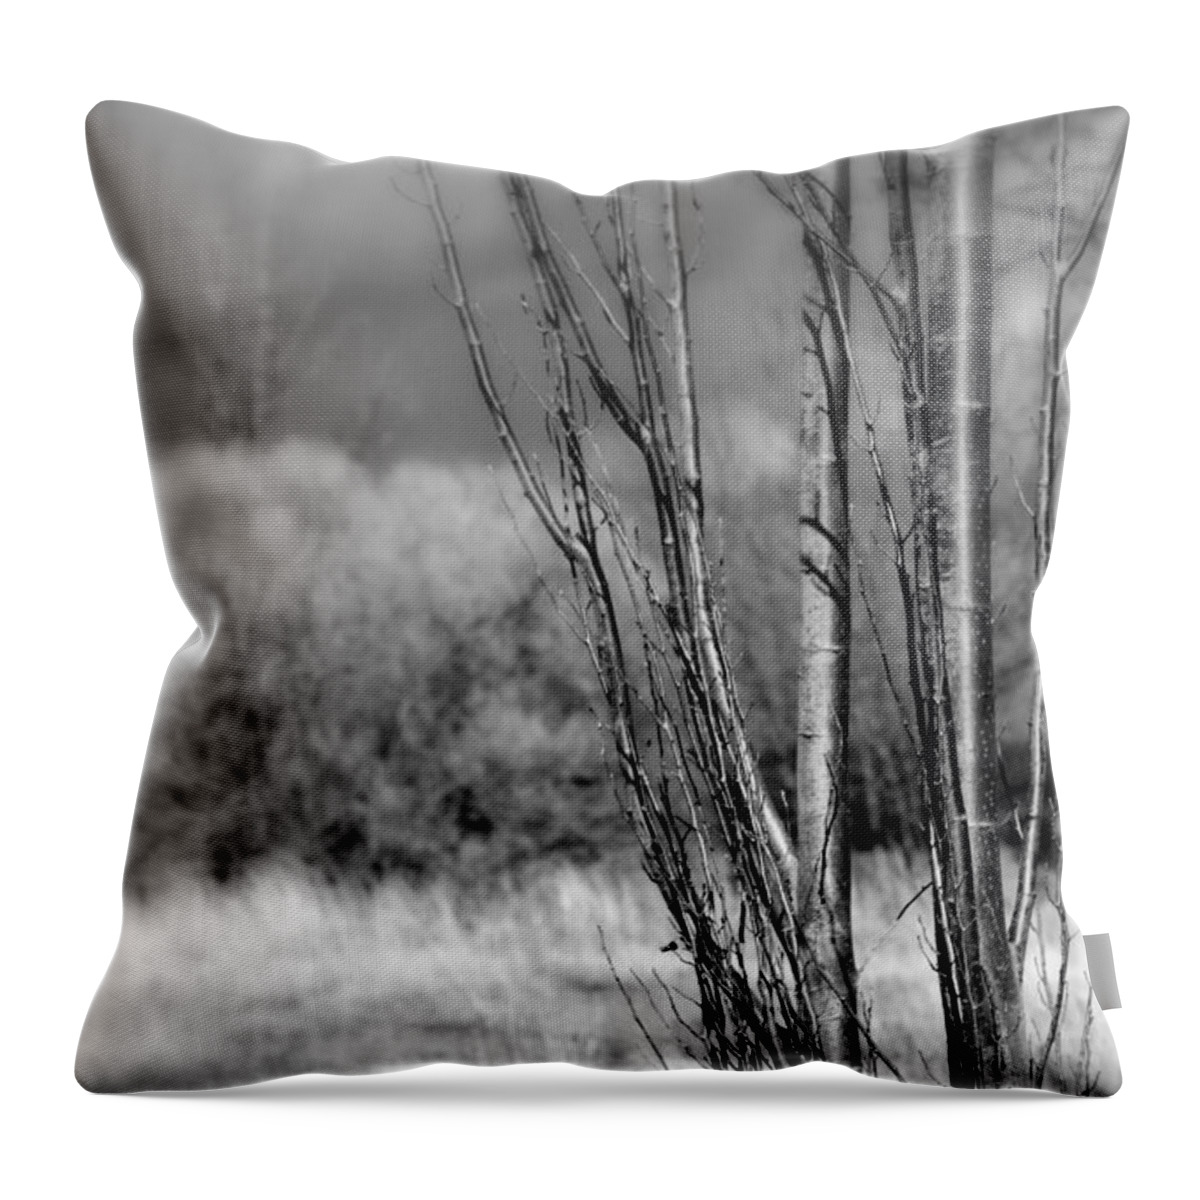 Landscape Throw Pillow featuring the photograph Winters Branch by Kathleen Grace